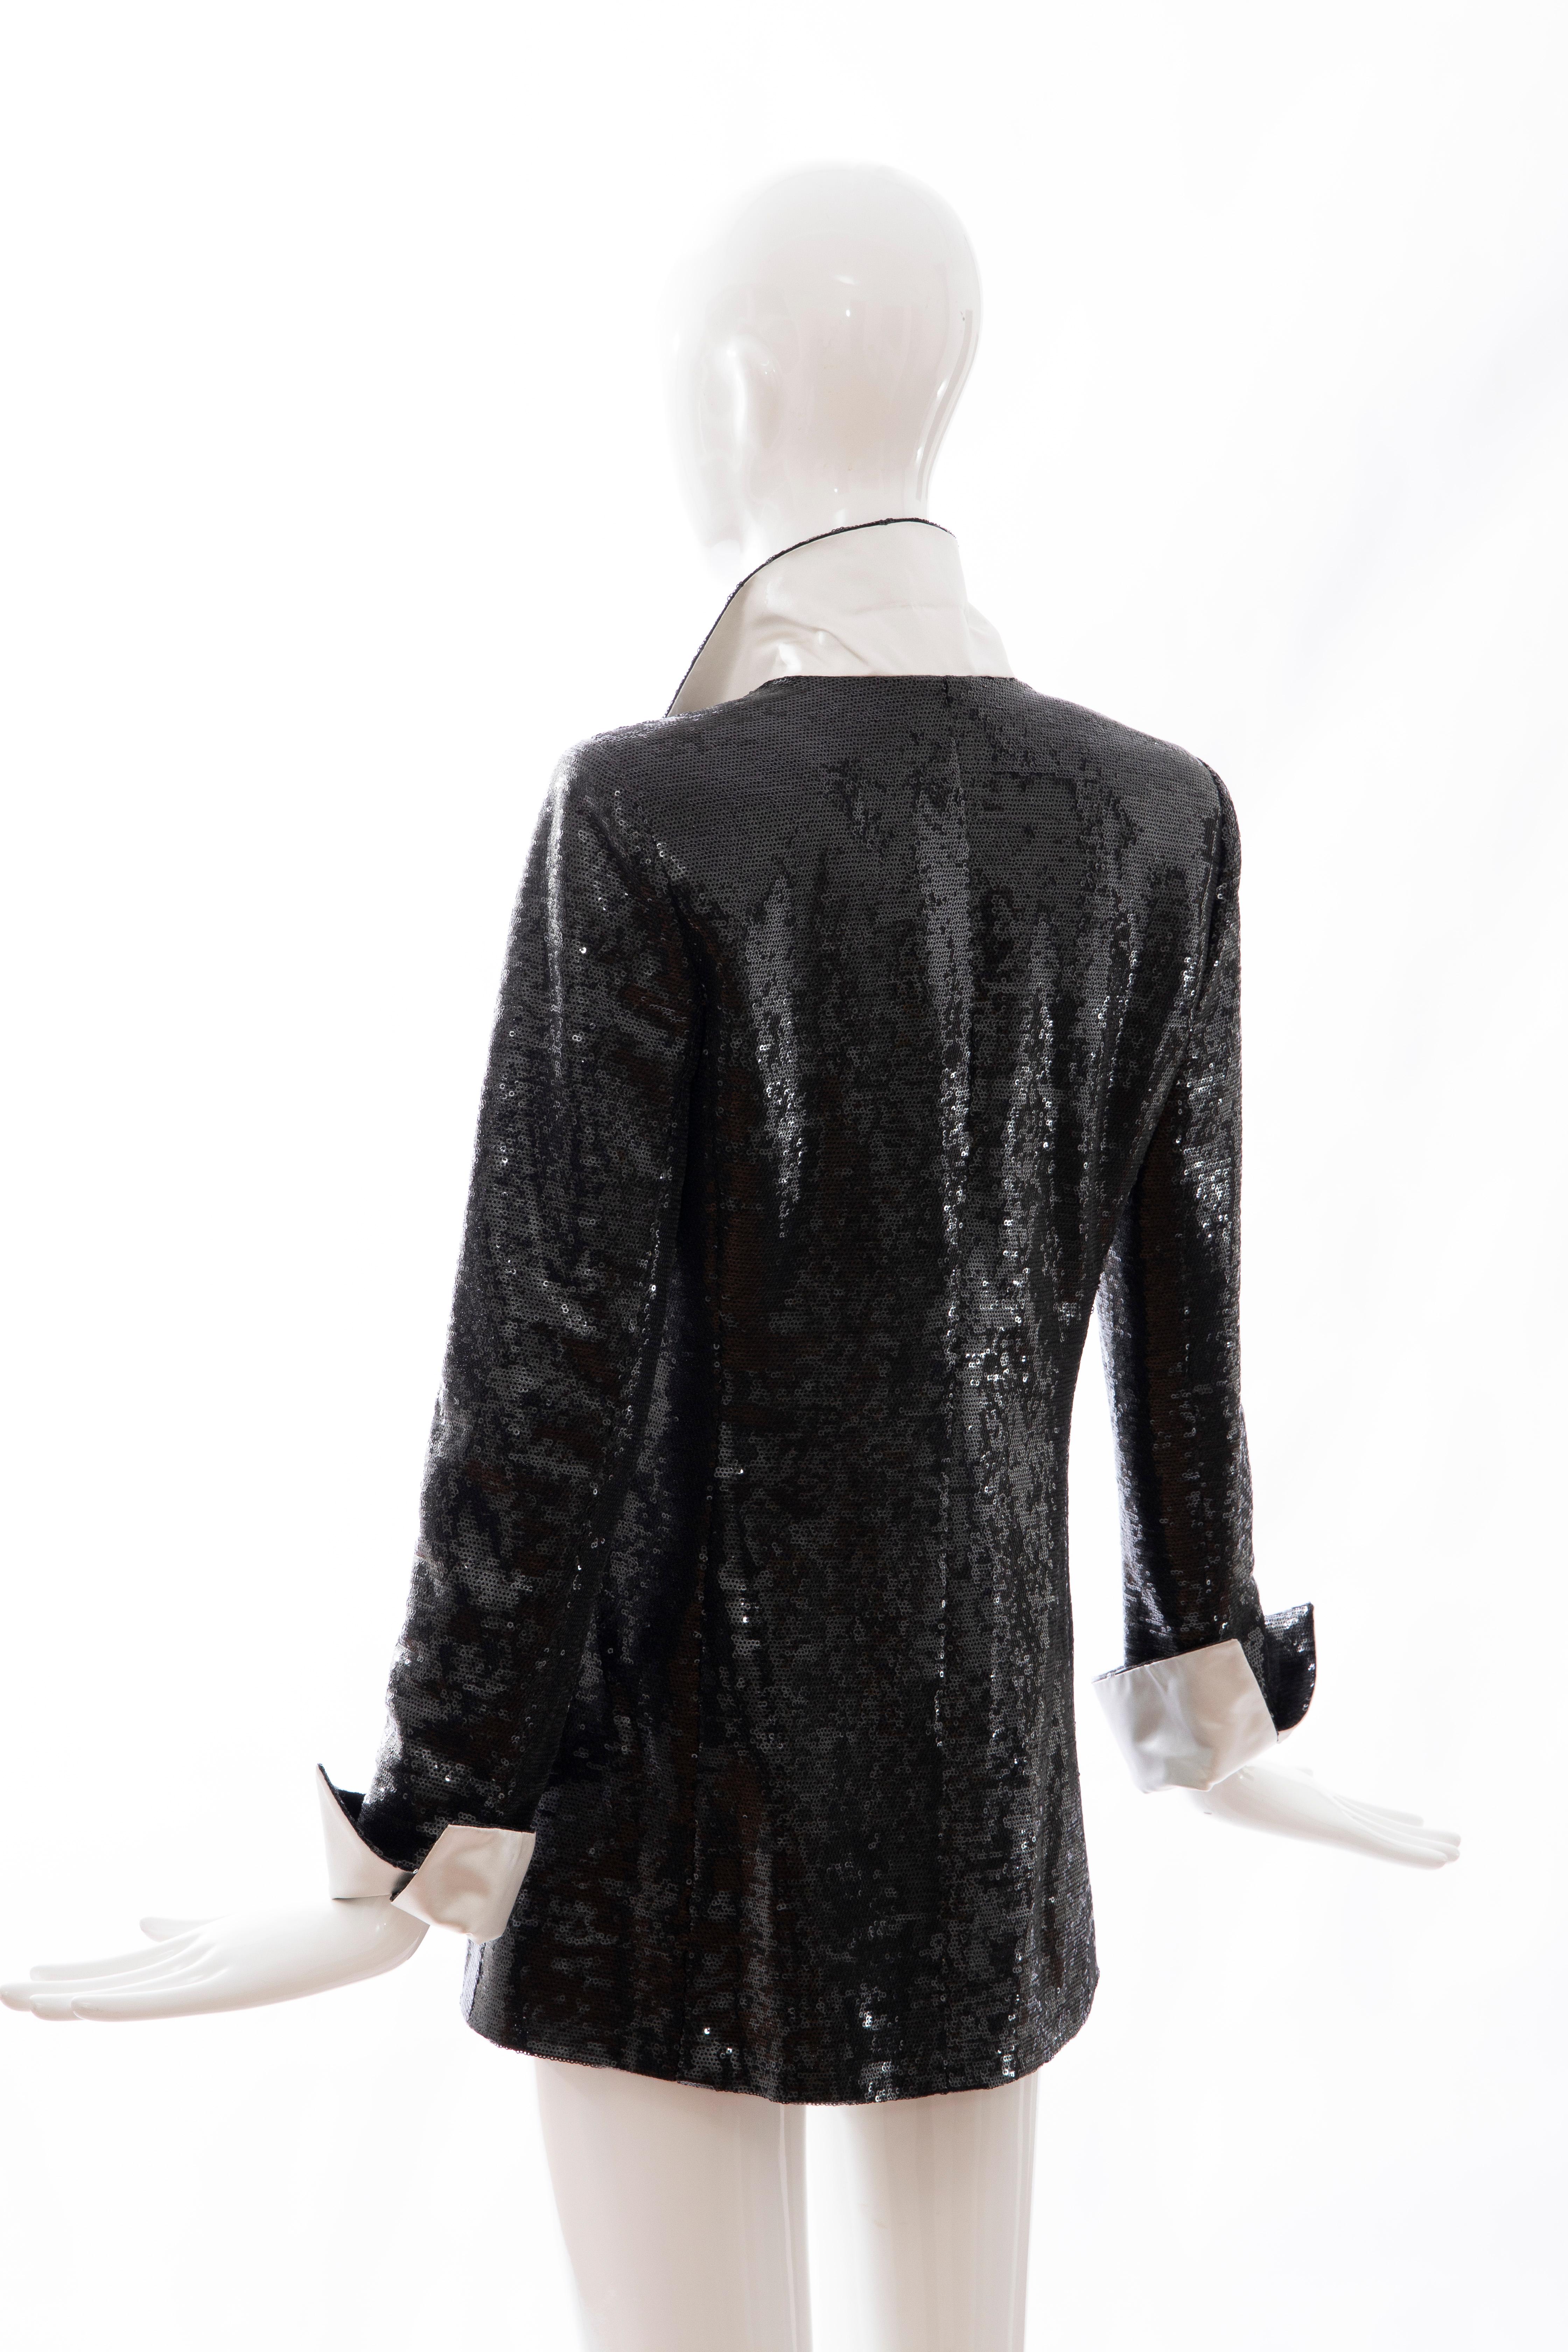 Chanel Black Embroidered Sequin Evening Jacket Ivory Silk Cuffs, Cruise 2009 For Sale 1